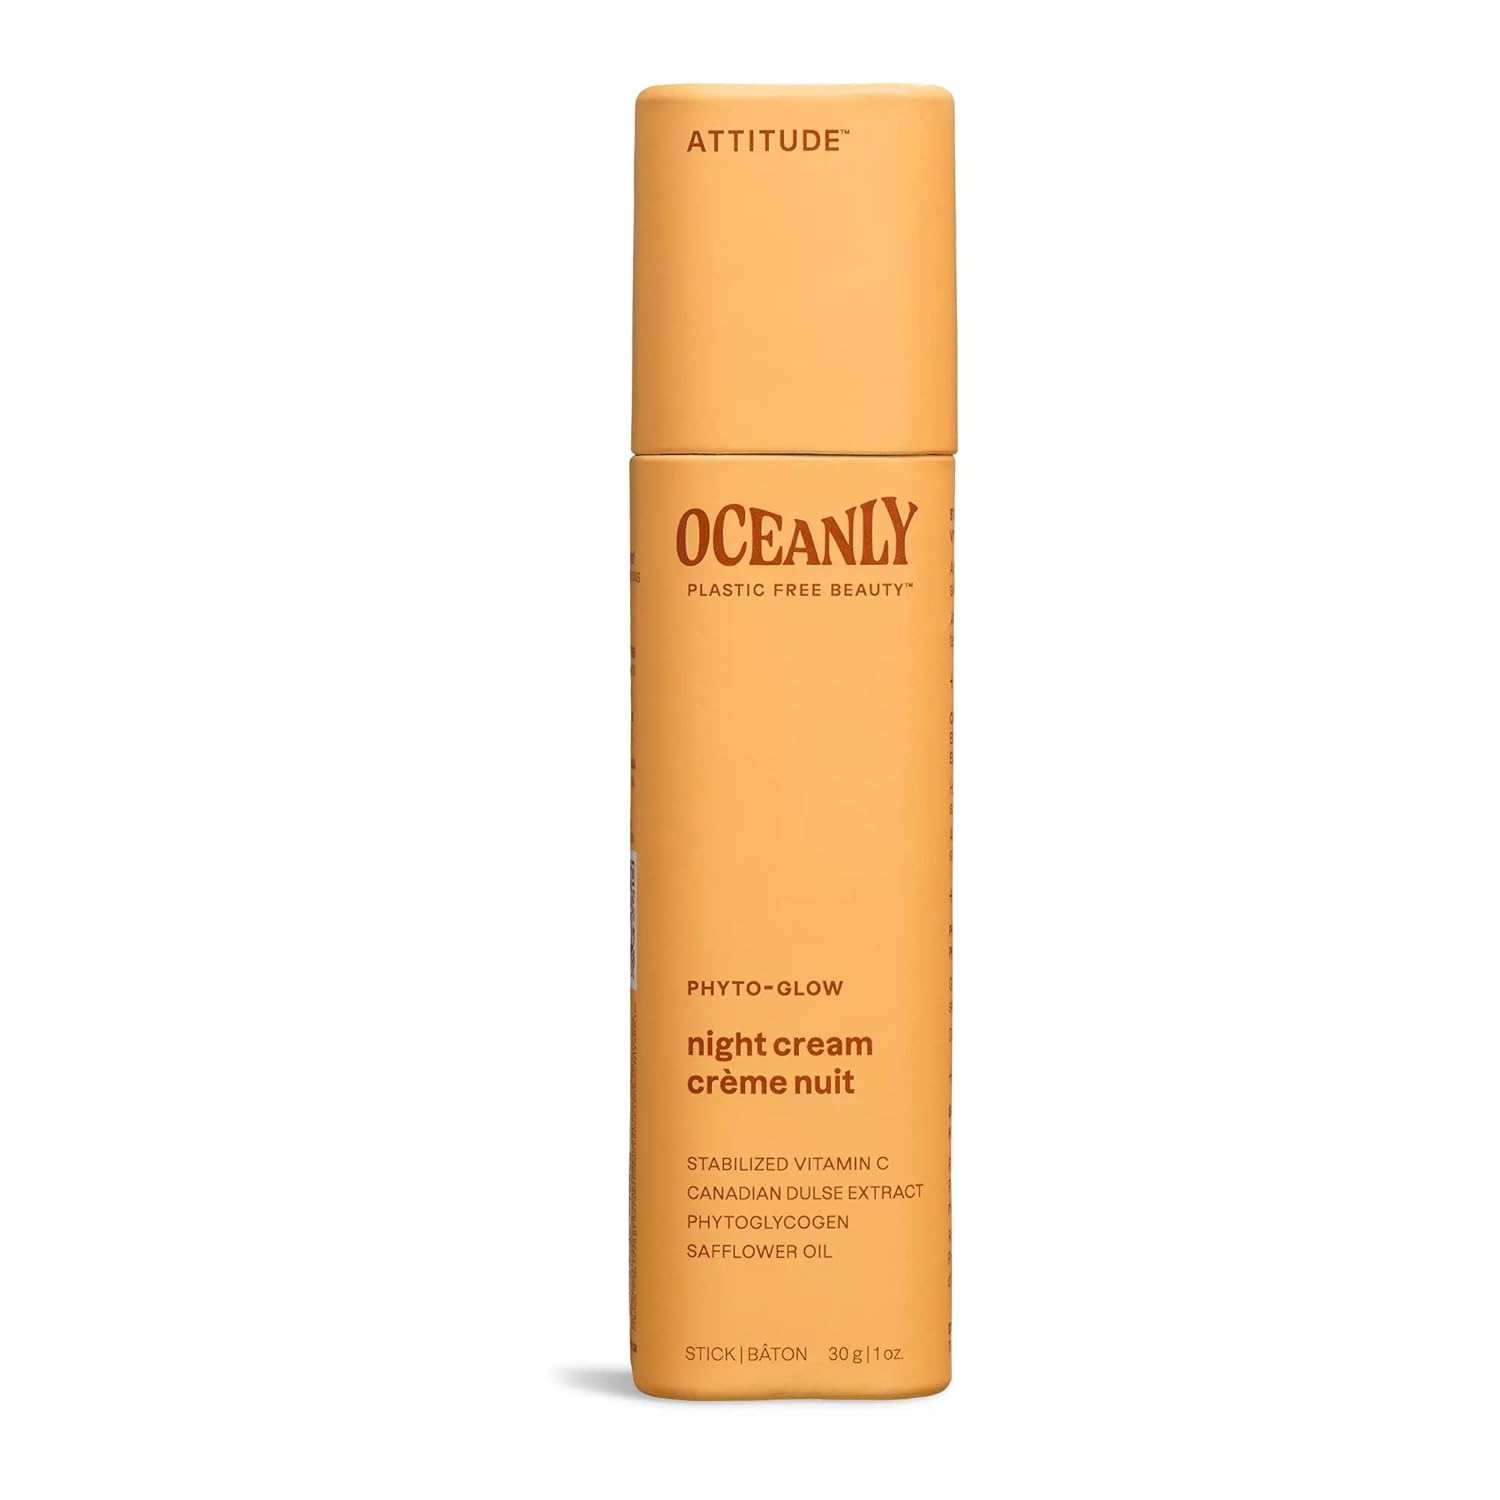 ATTITUDE Oceanly Night Cream Bar, EWG Verified, Plastic-free, Plant and Mineral-Based Ingredients, Vegan and Cruelty-free Face Moisturizing Products, PHYTO GLOW, Unscented, 1 Ounce